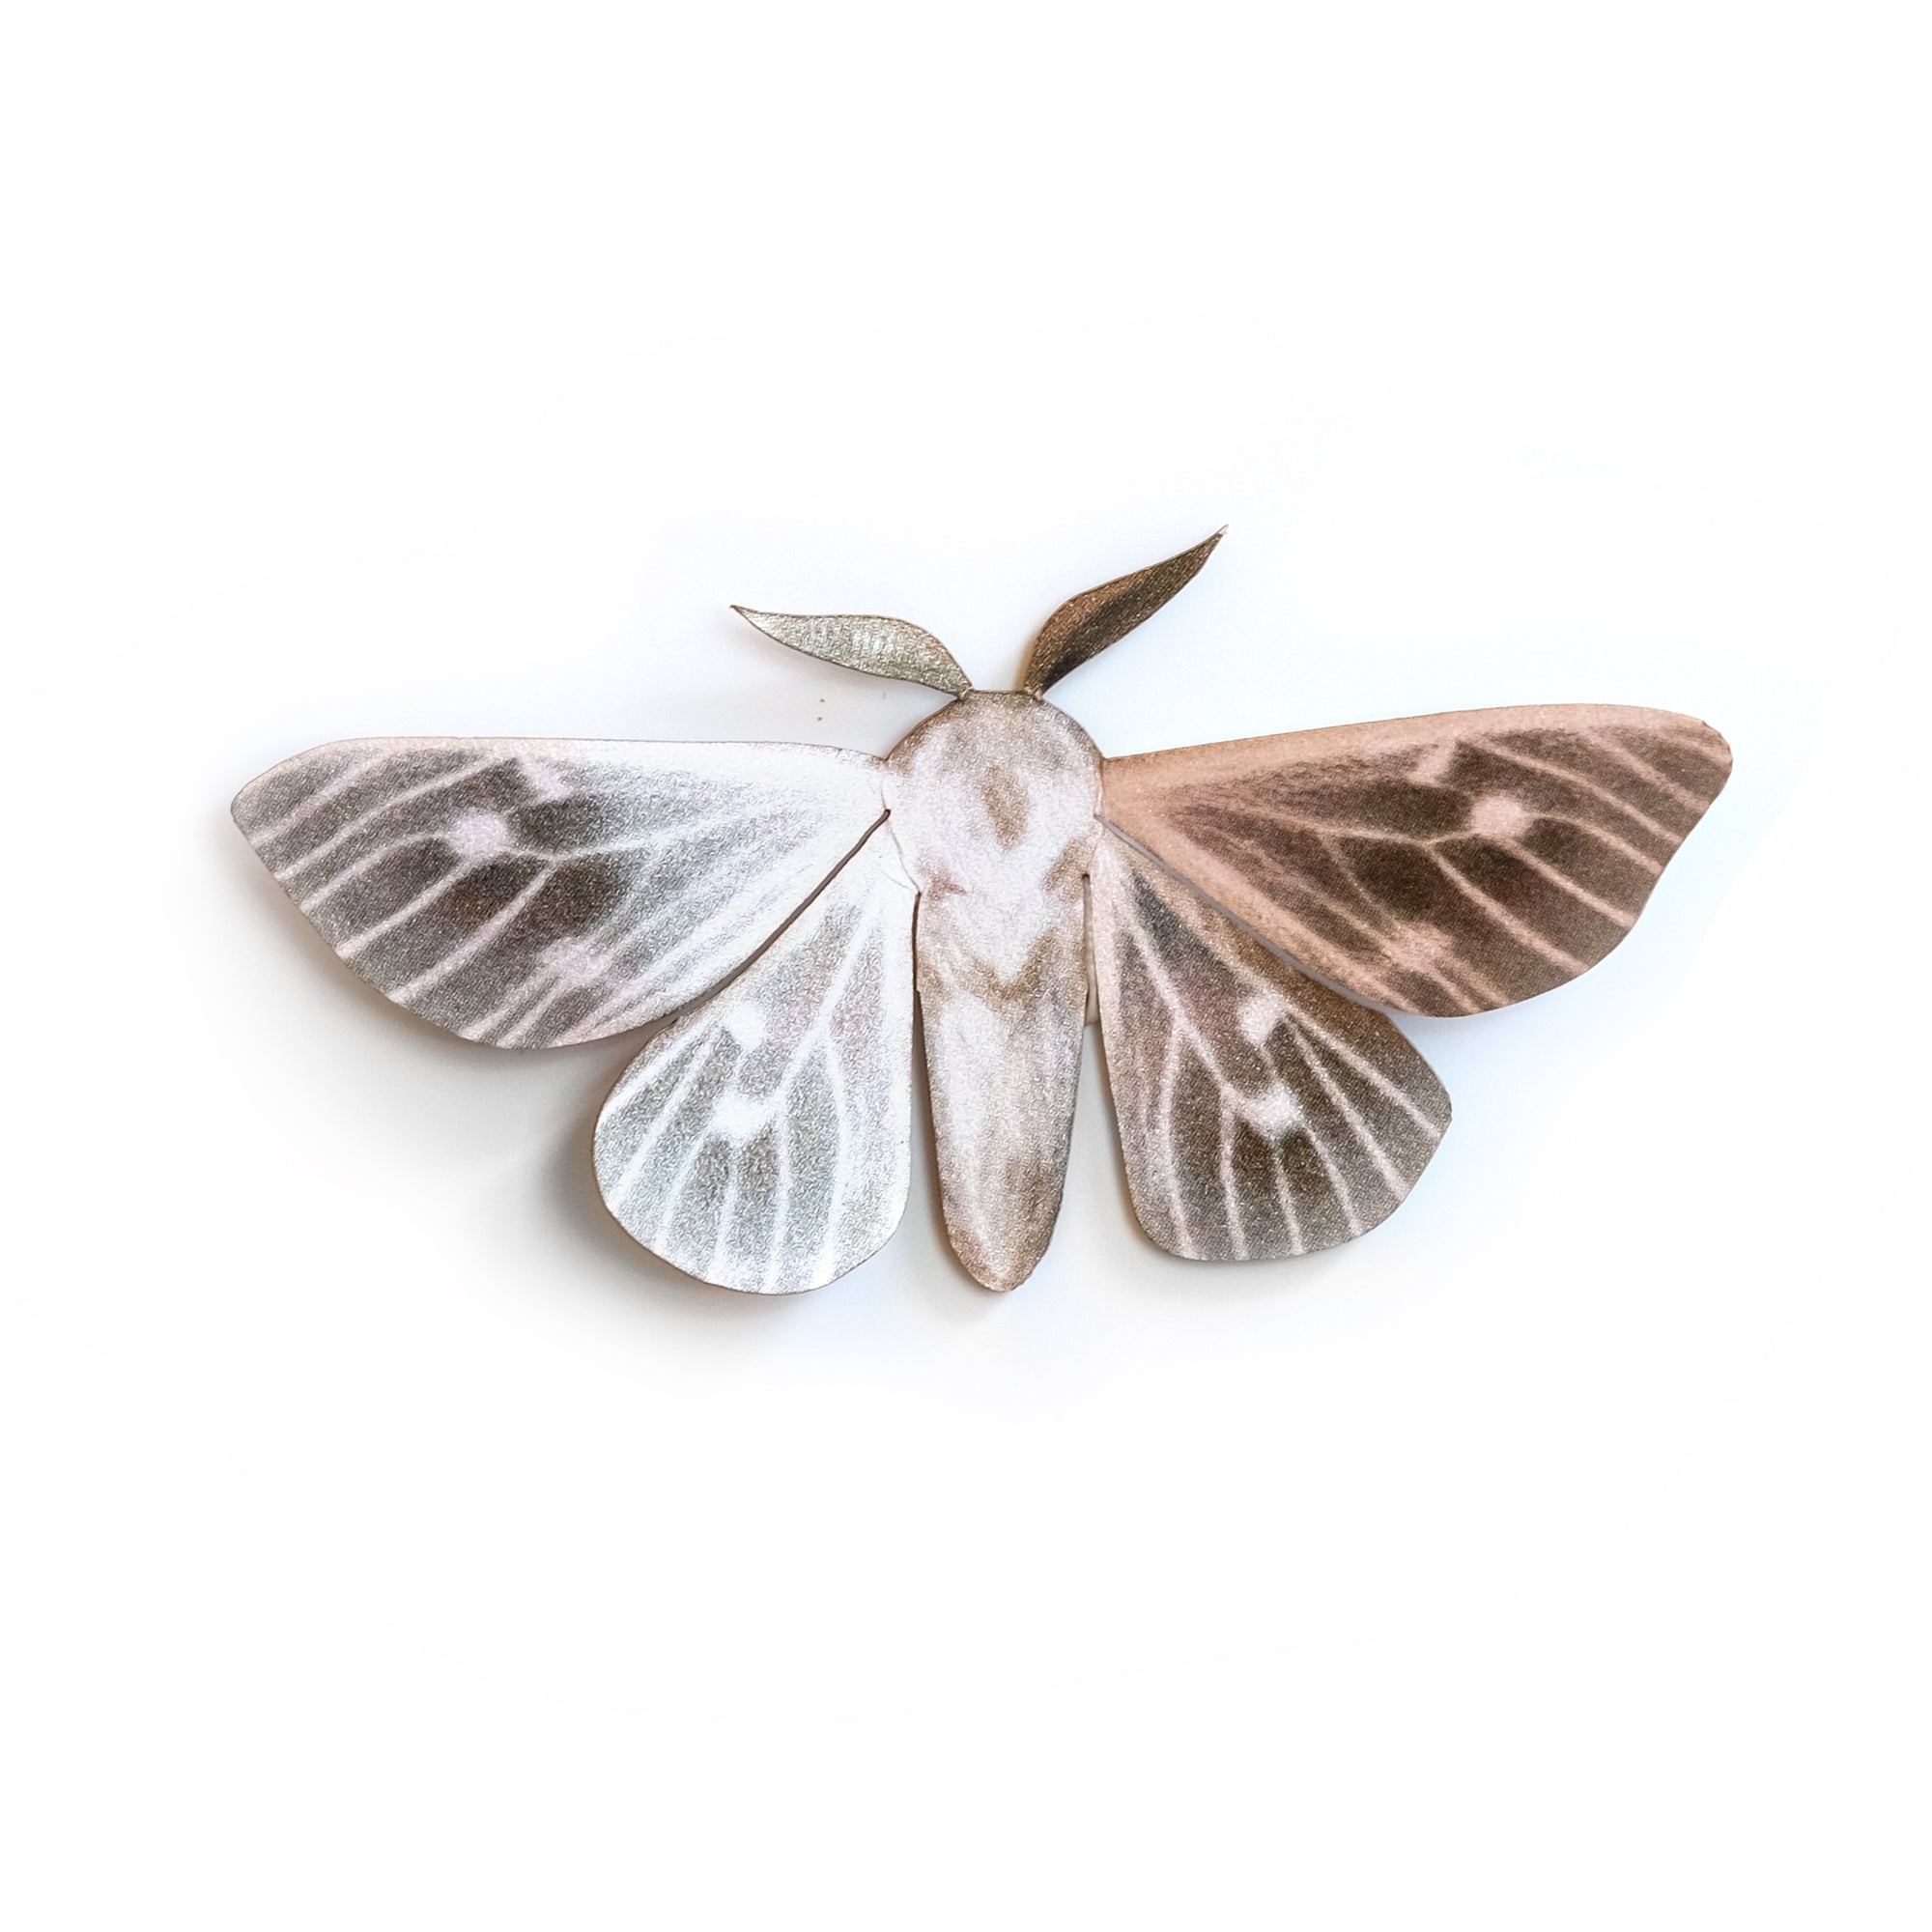 'Laced-wing' moth